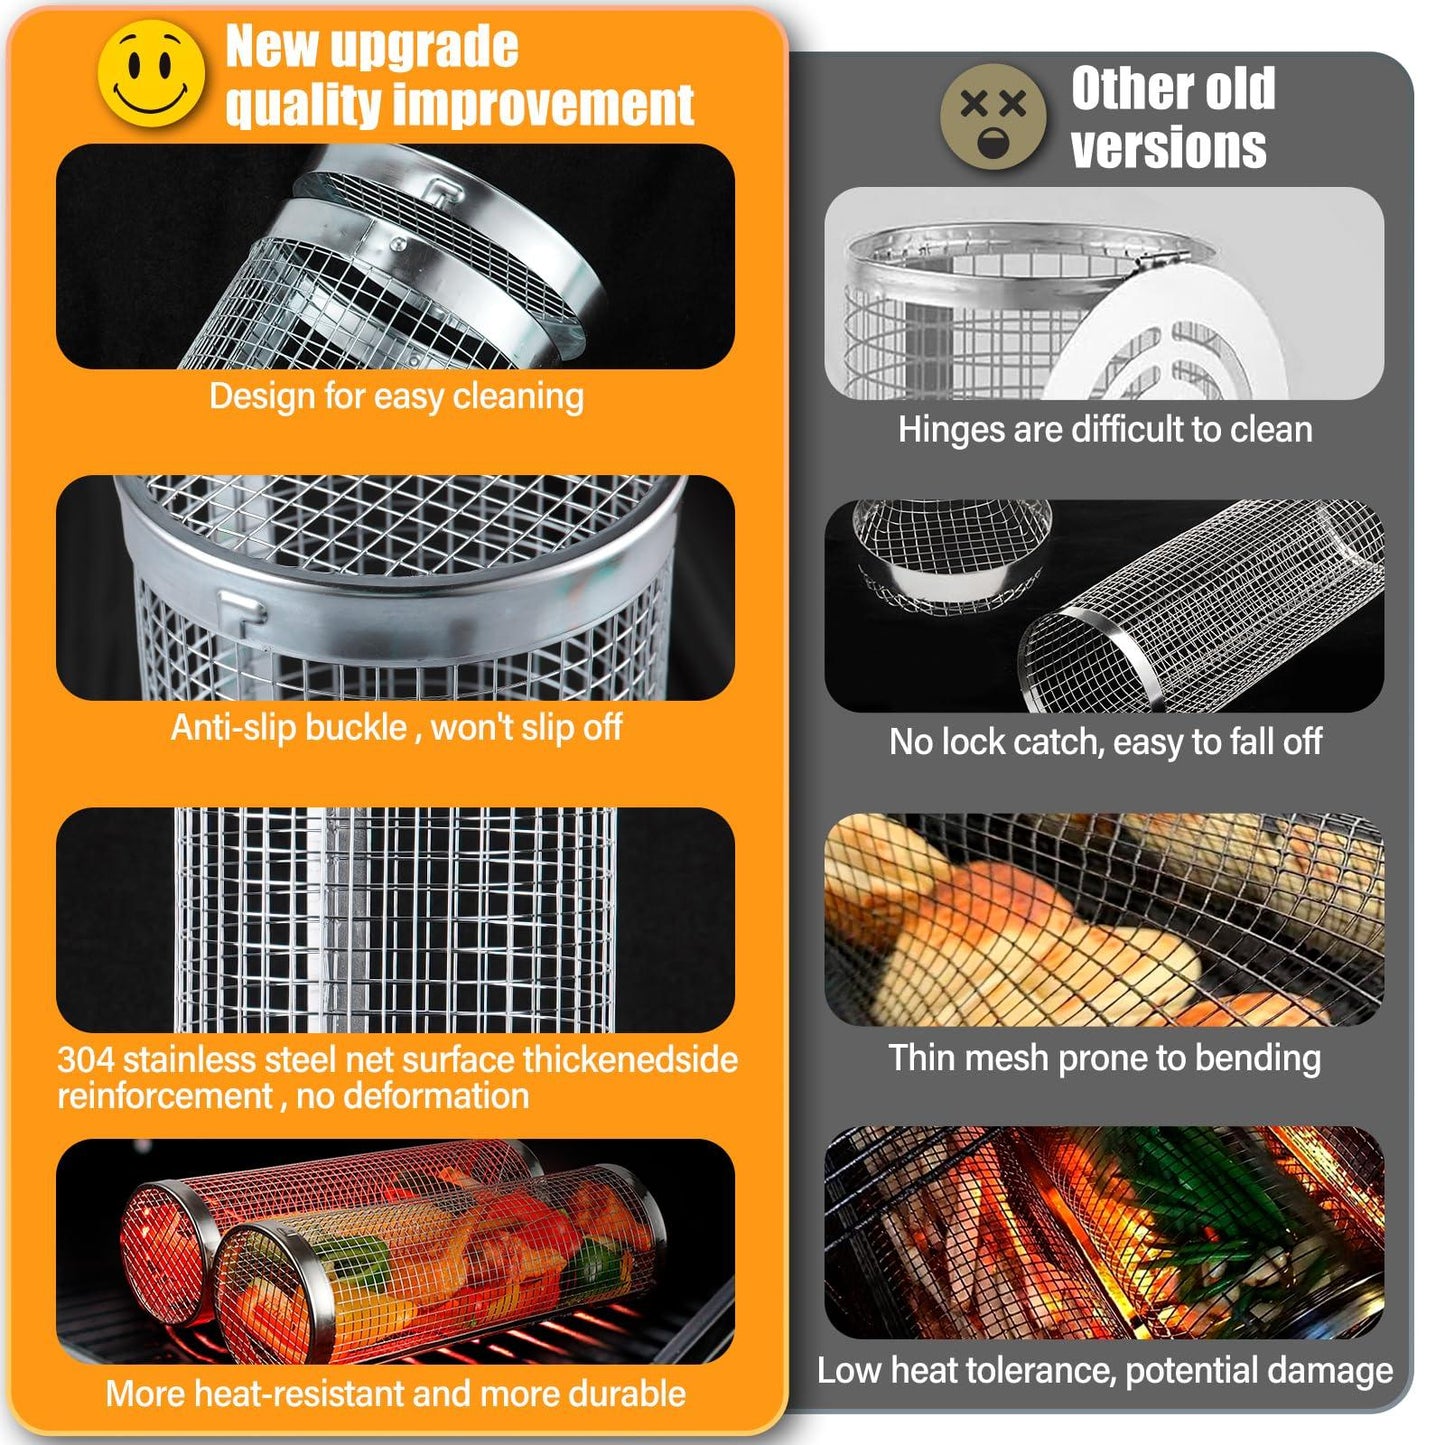 Everpeak Grill Basket Stainless Steel - Rolling Grilling Basket for Outdoor Grill - Large BBQ Tools Baskets for Grilling - Versatile and Convenient - Premium Food-grade Material - CookCave